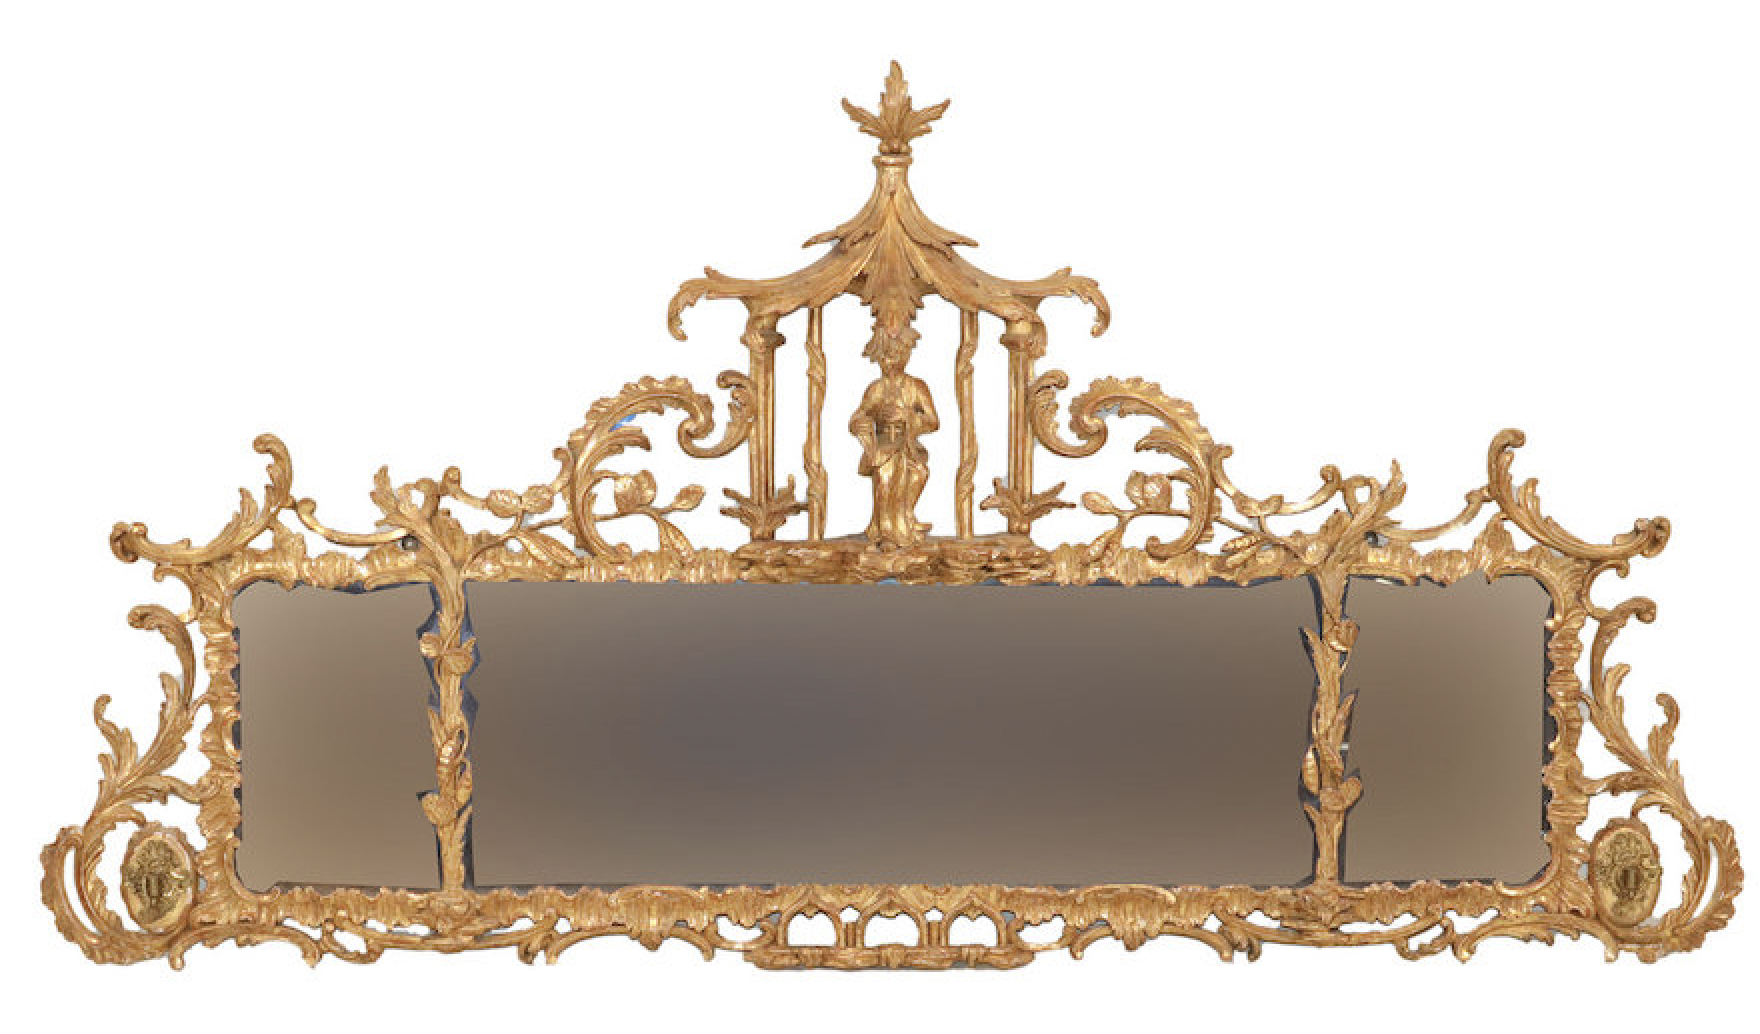 George III Chinoiserie-decorated giltwood overmantel mirror, estimated at $5,000-$10,000